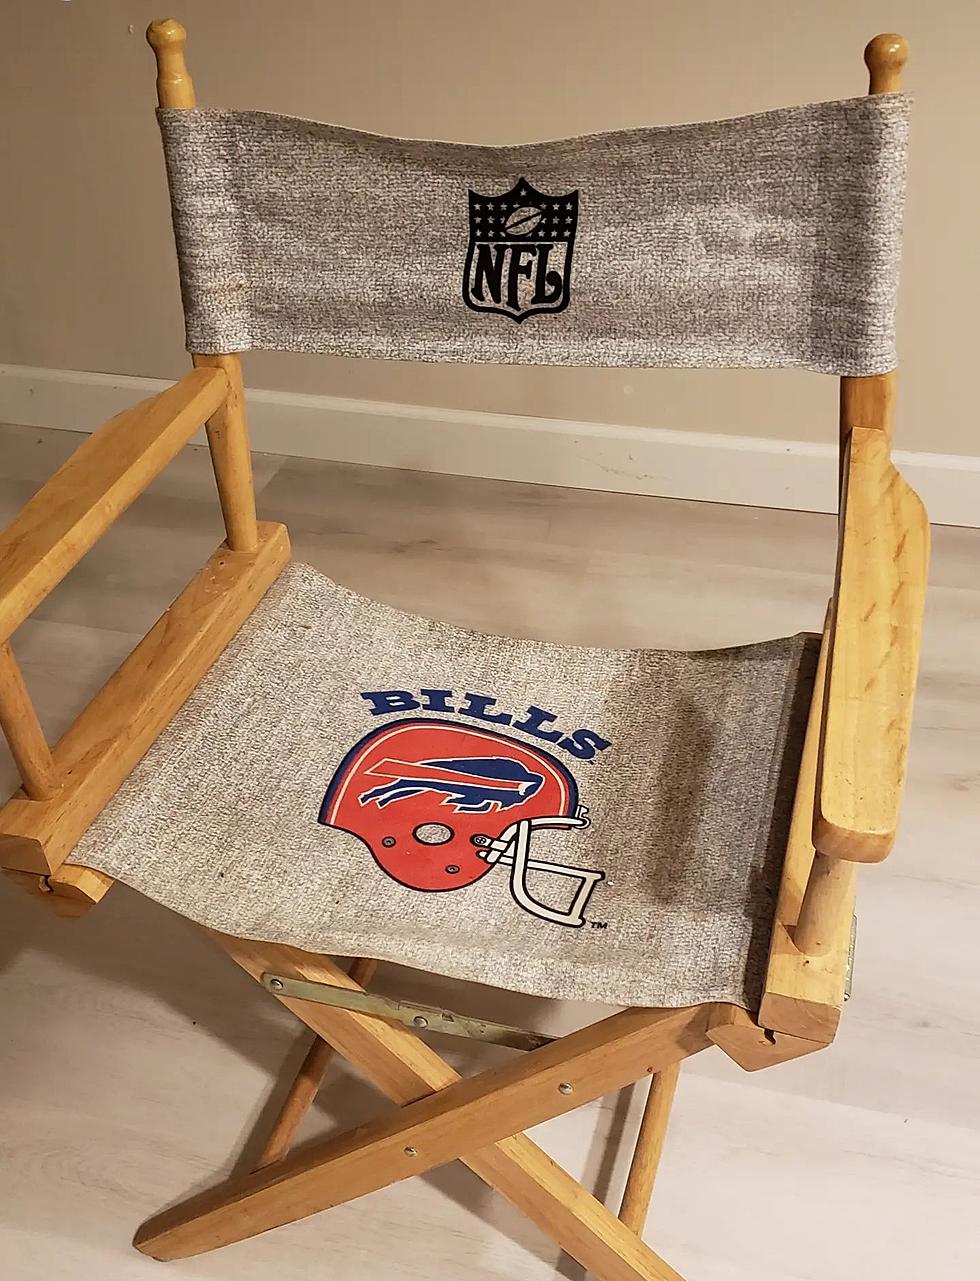 You Could Make Some Money If You Have These Buffalo Bills Items in Your House